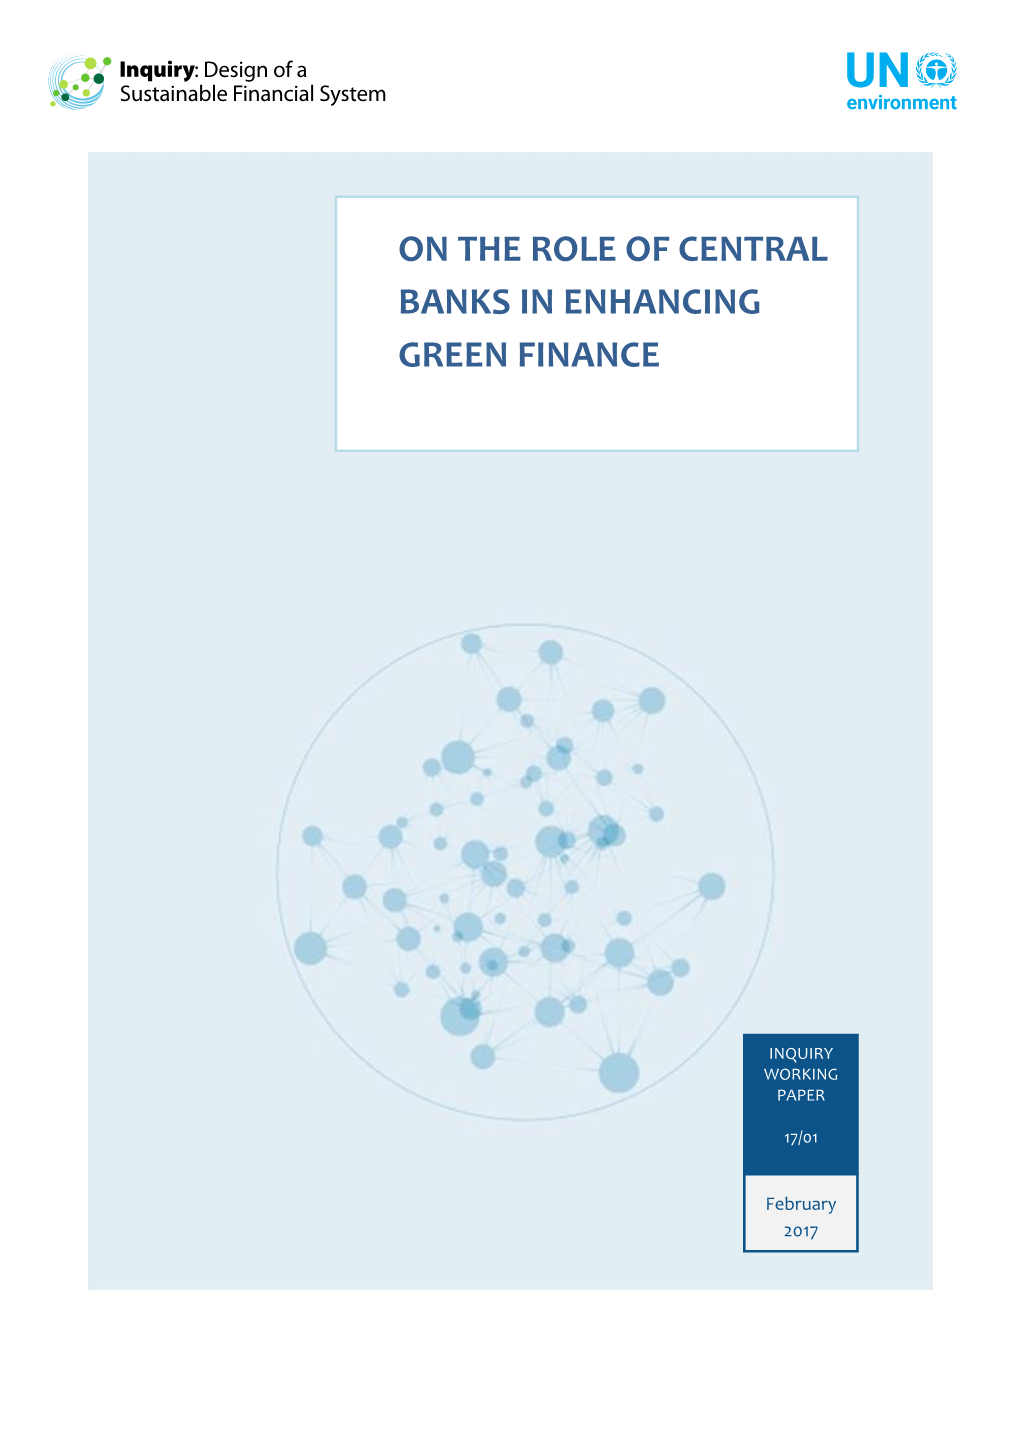 On the Role of Central Banks in Enhancing Green Finance